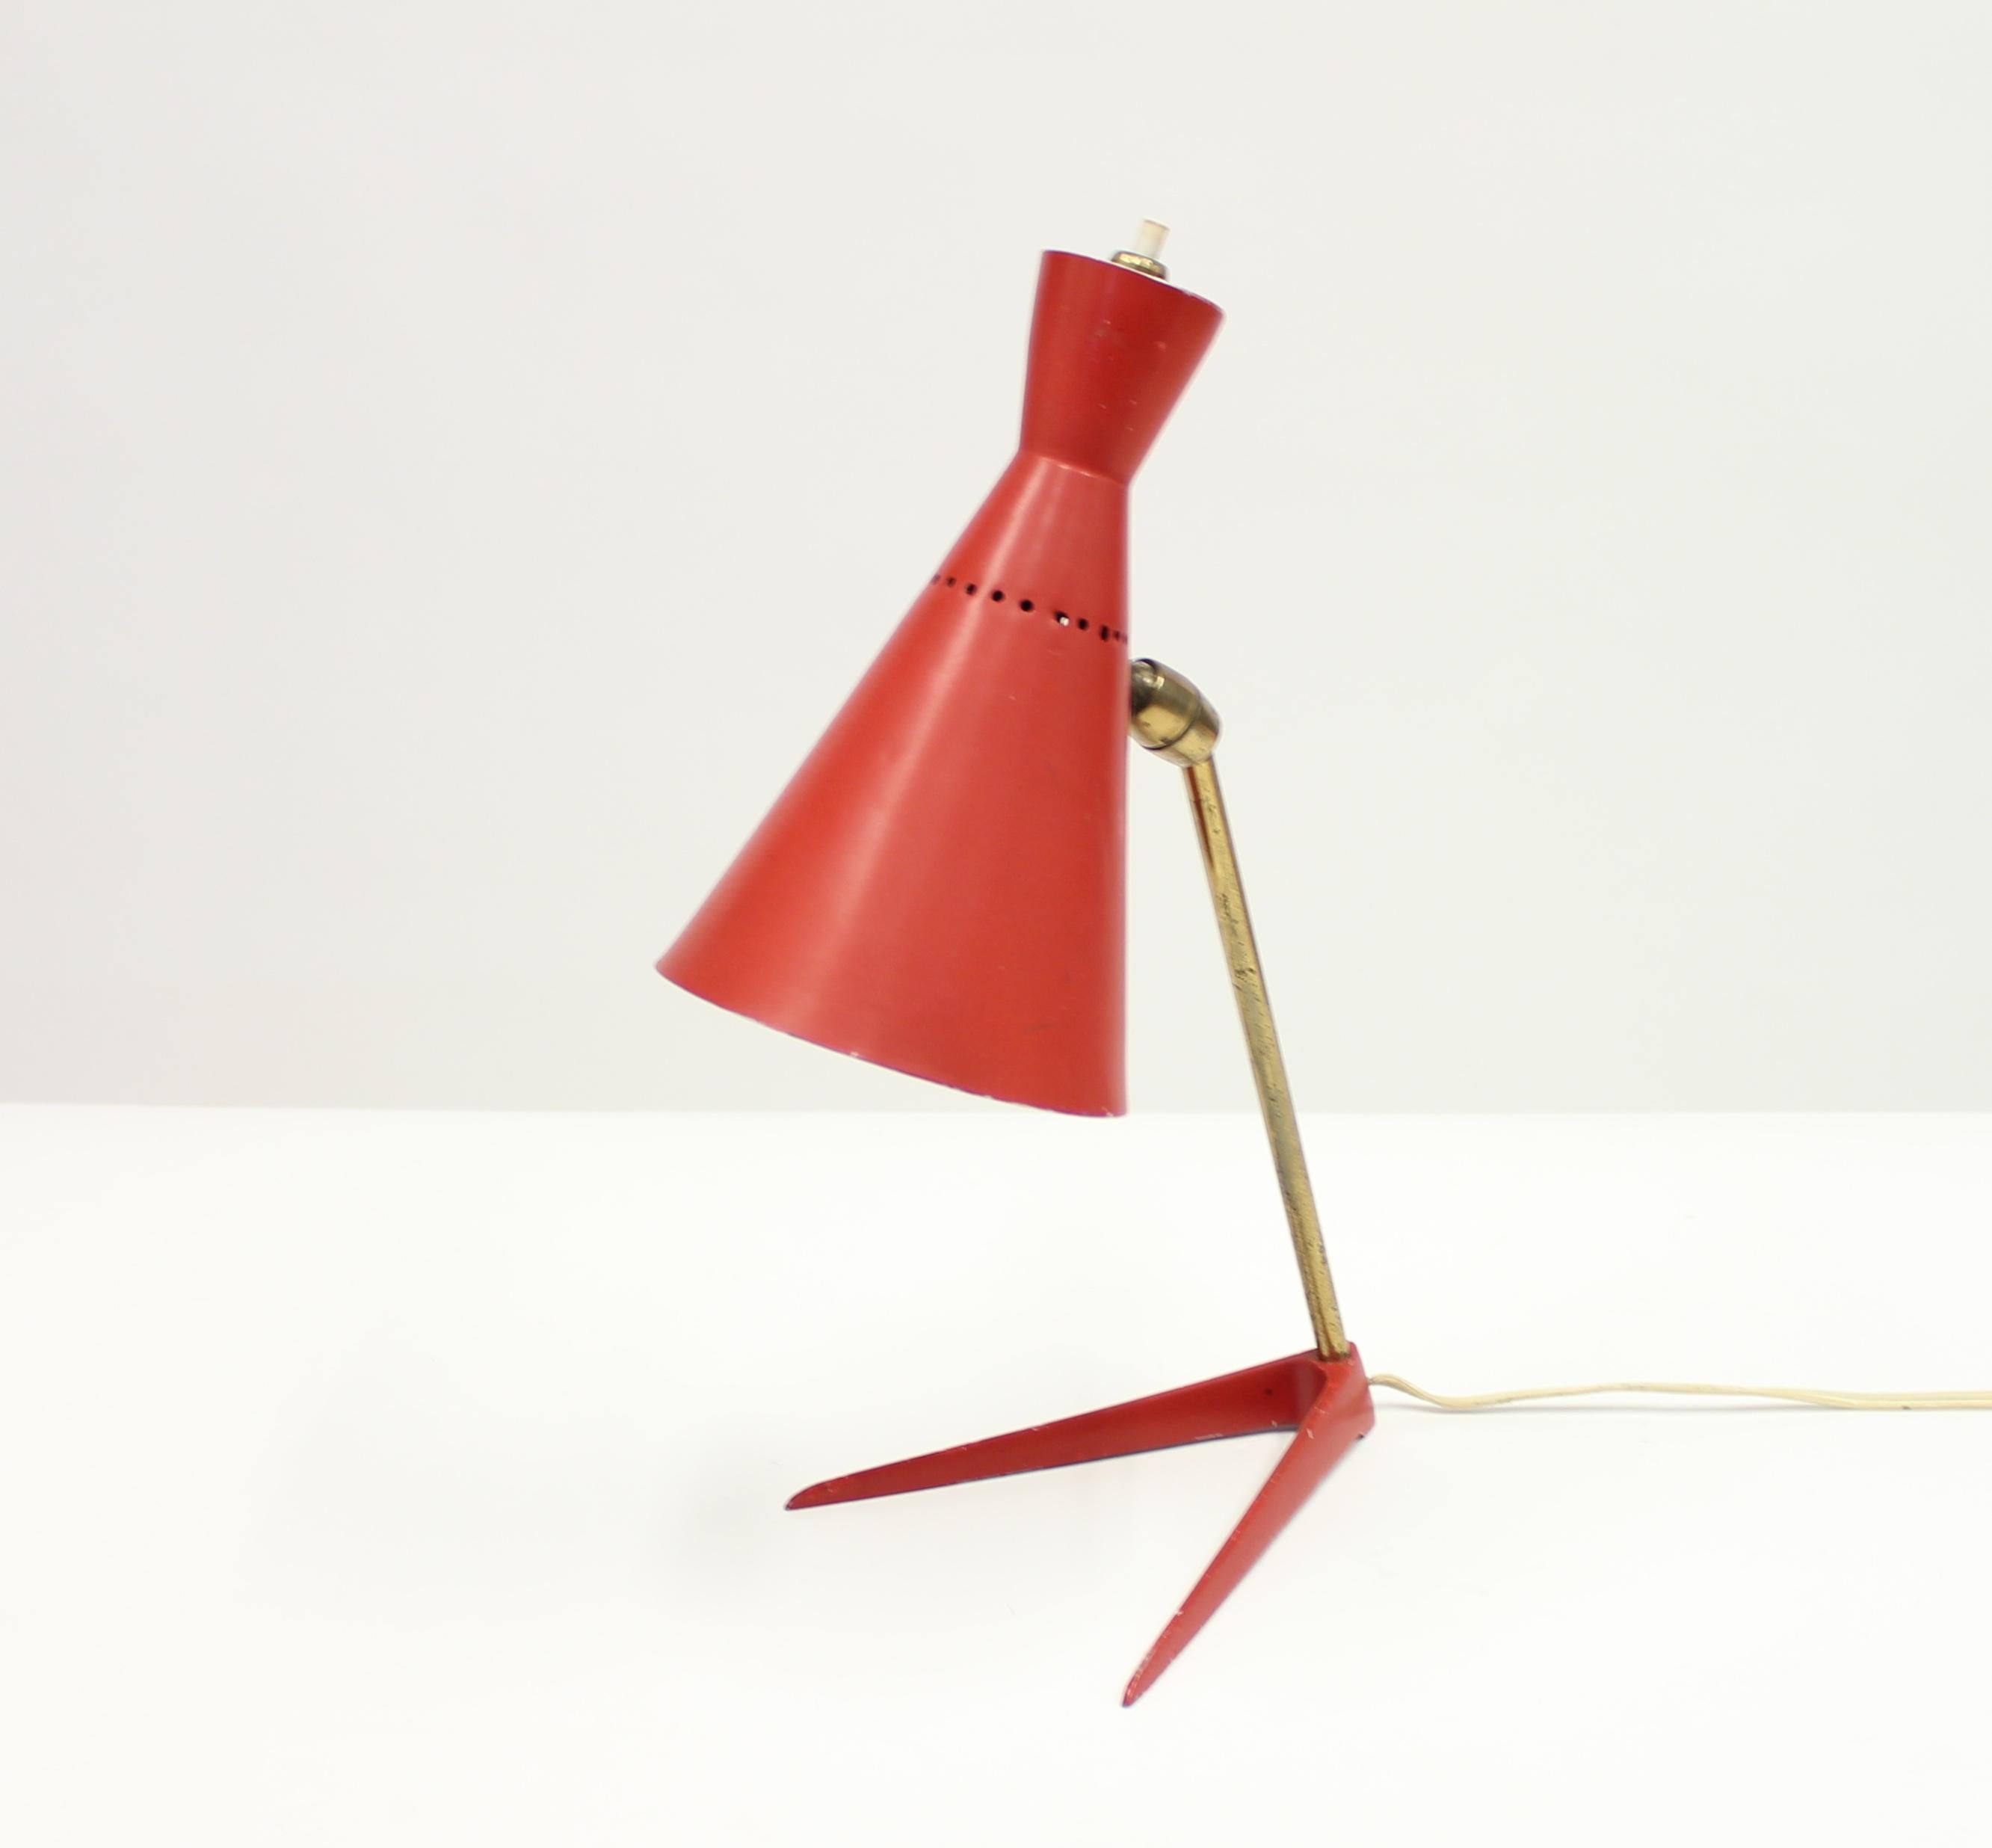 Superb 1950s Ferrari red Italian table lamp with an adjustable shade on a V-shaped base connected by a brass stem.